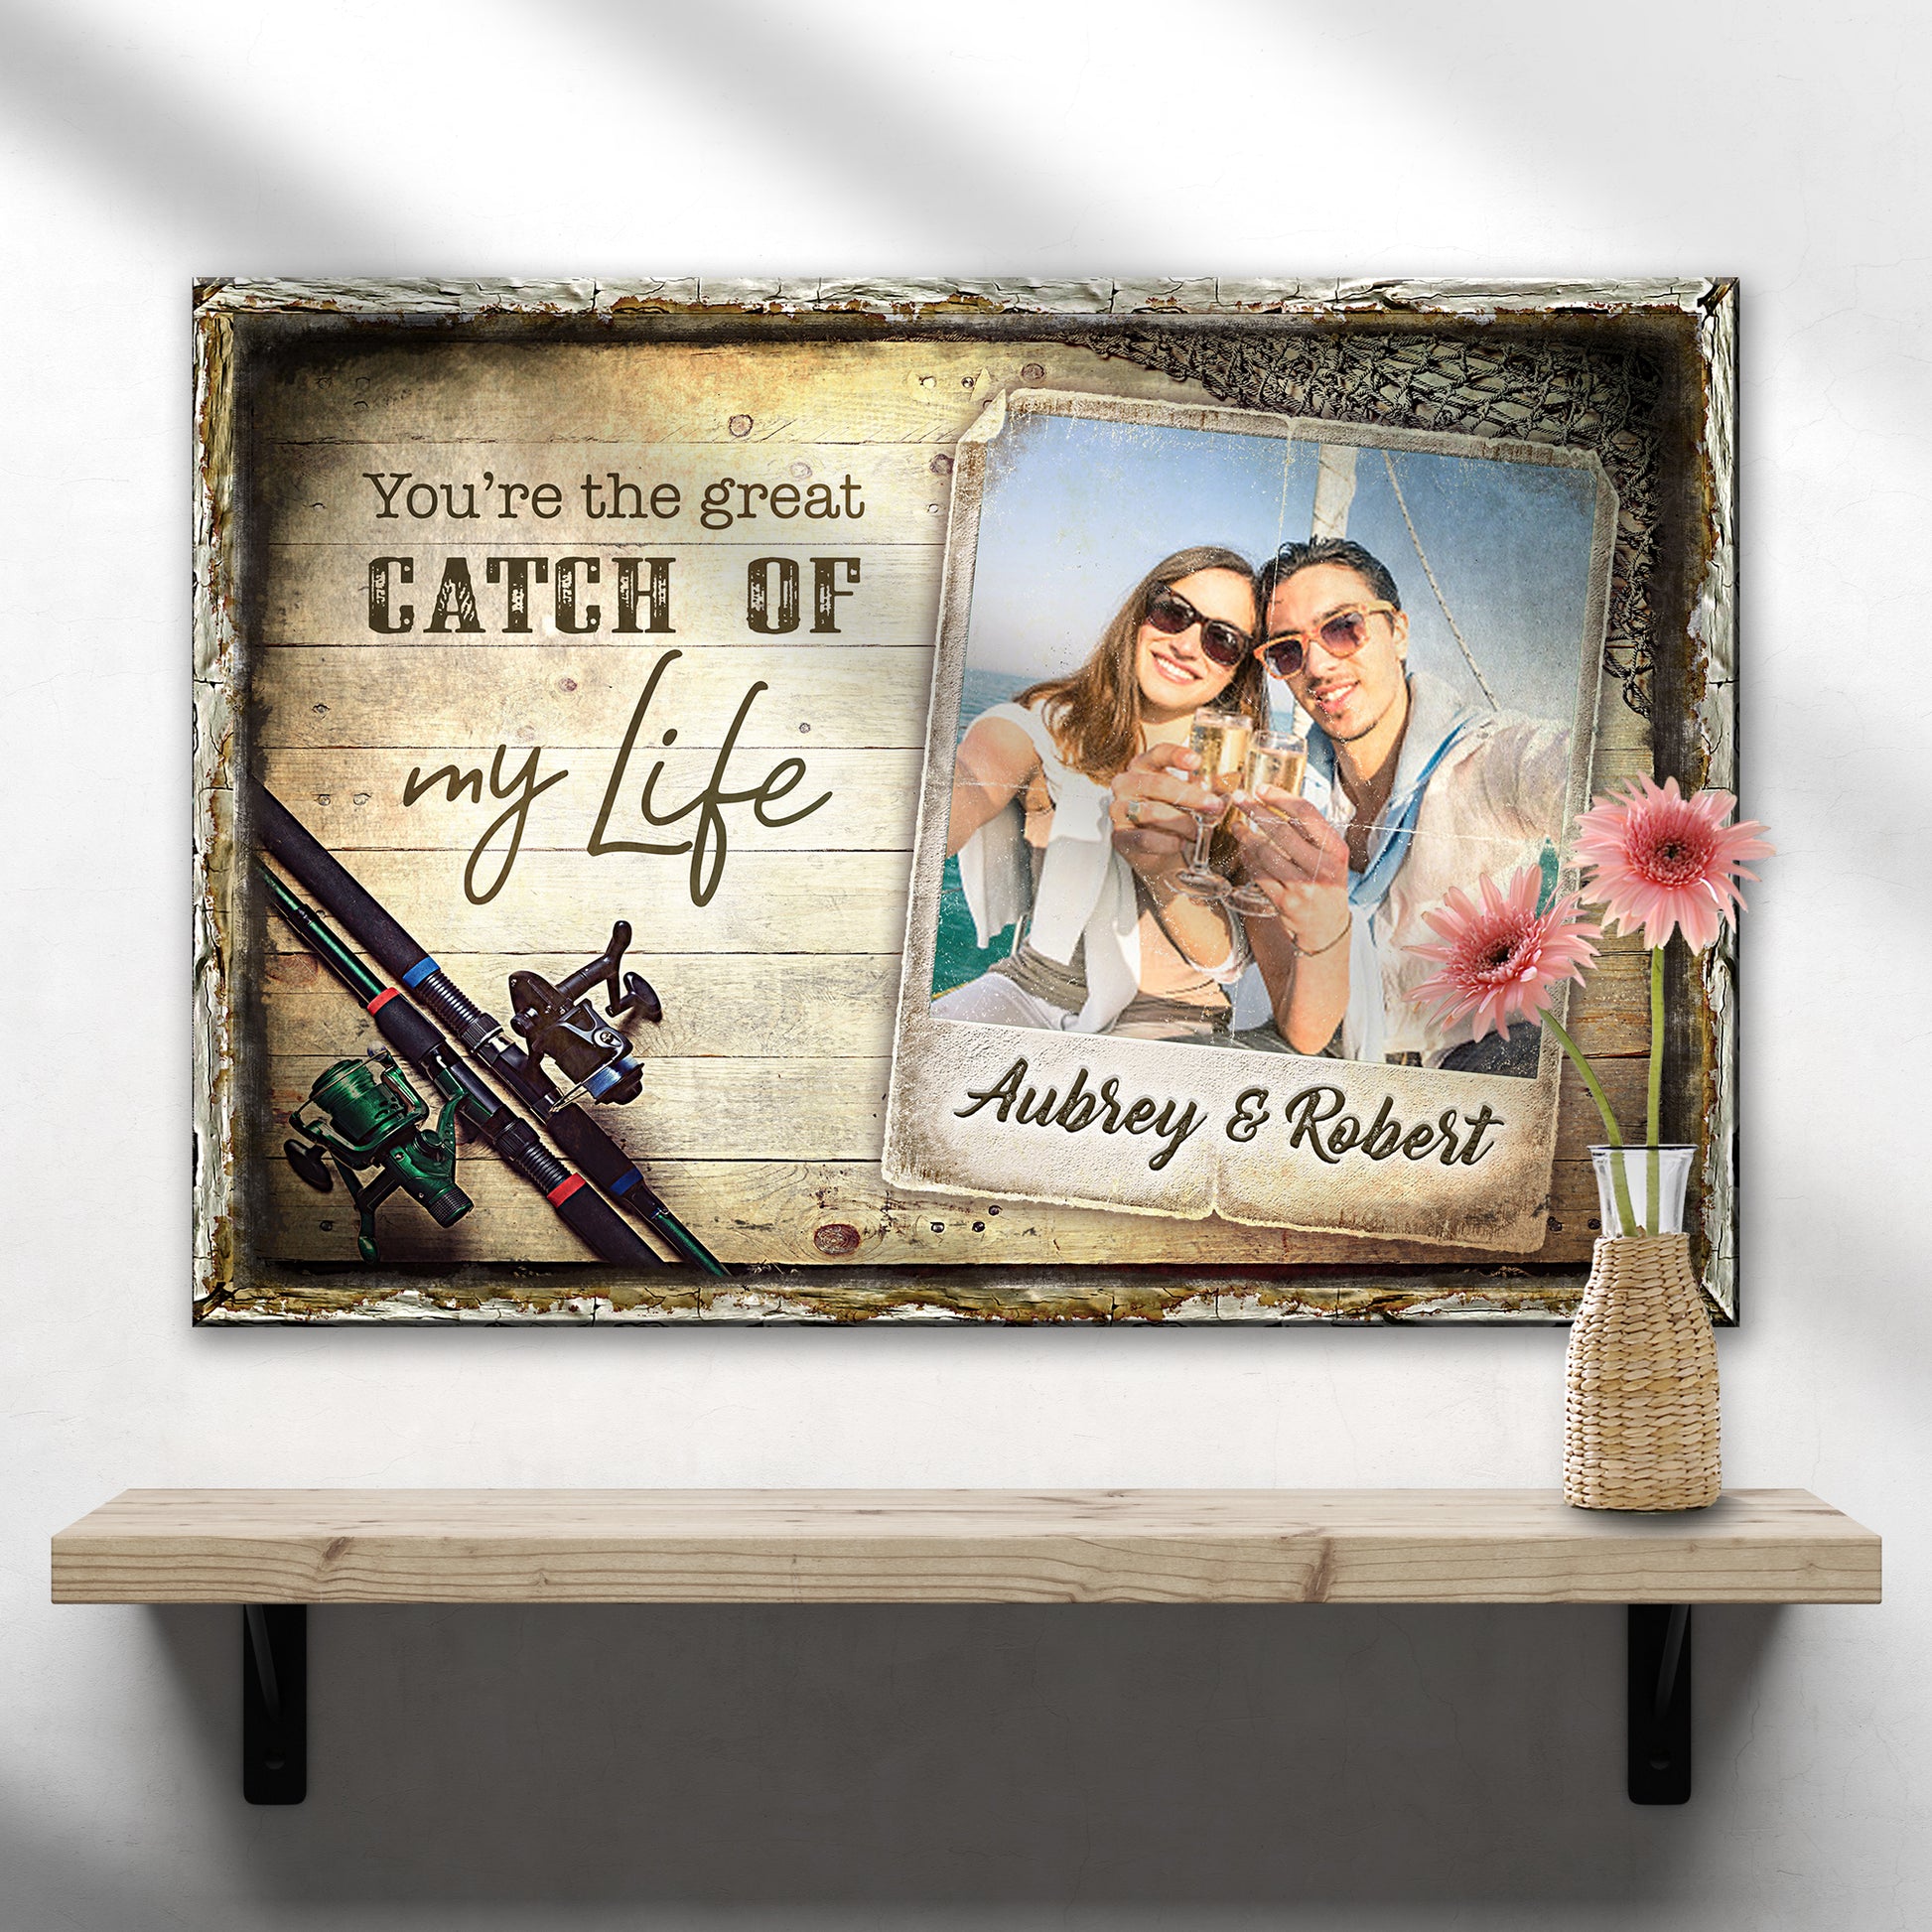 You're The Great Catch Of My Life Sign - Image by Tailored Canvases